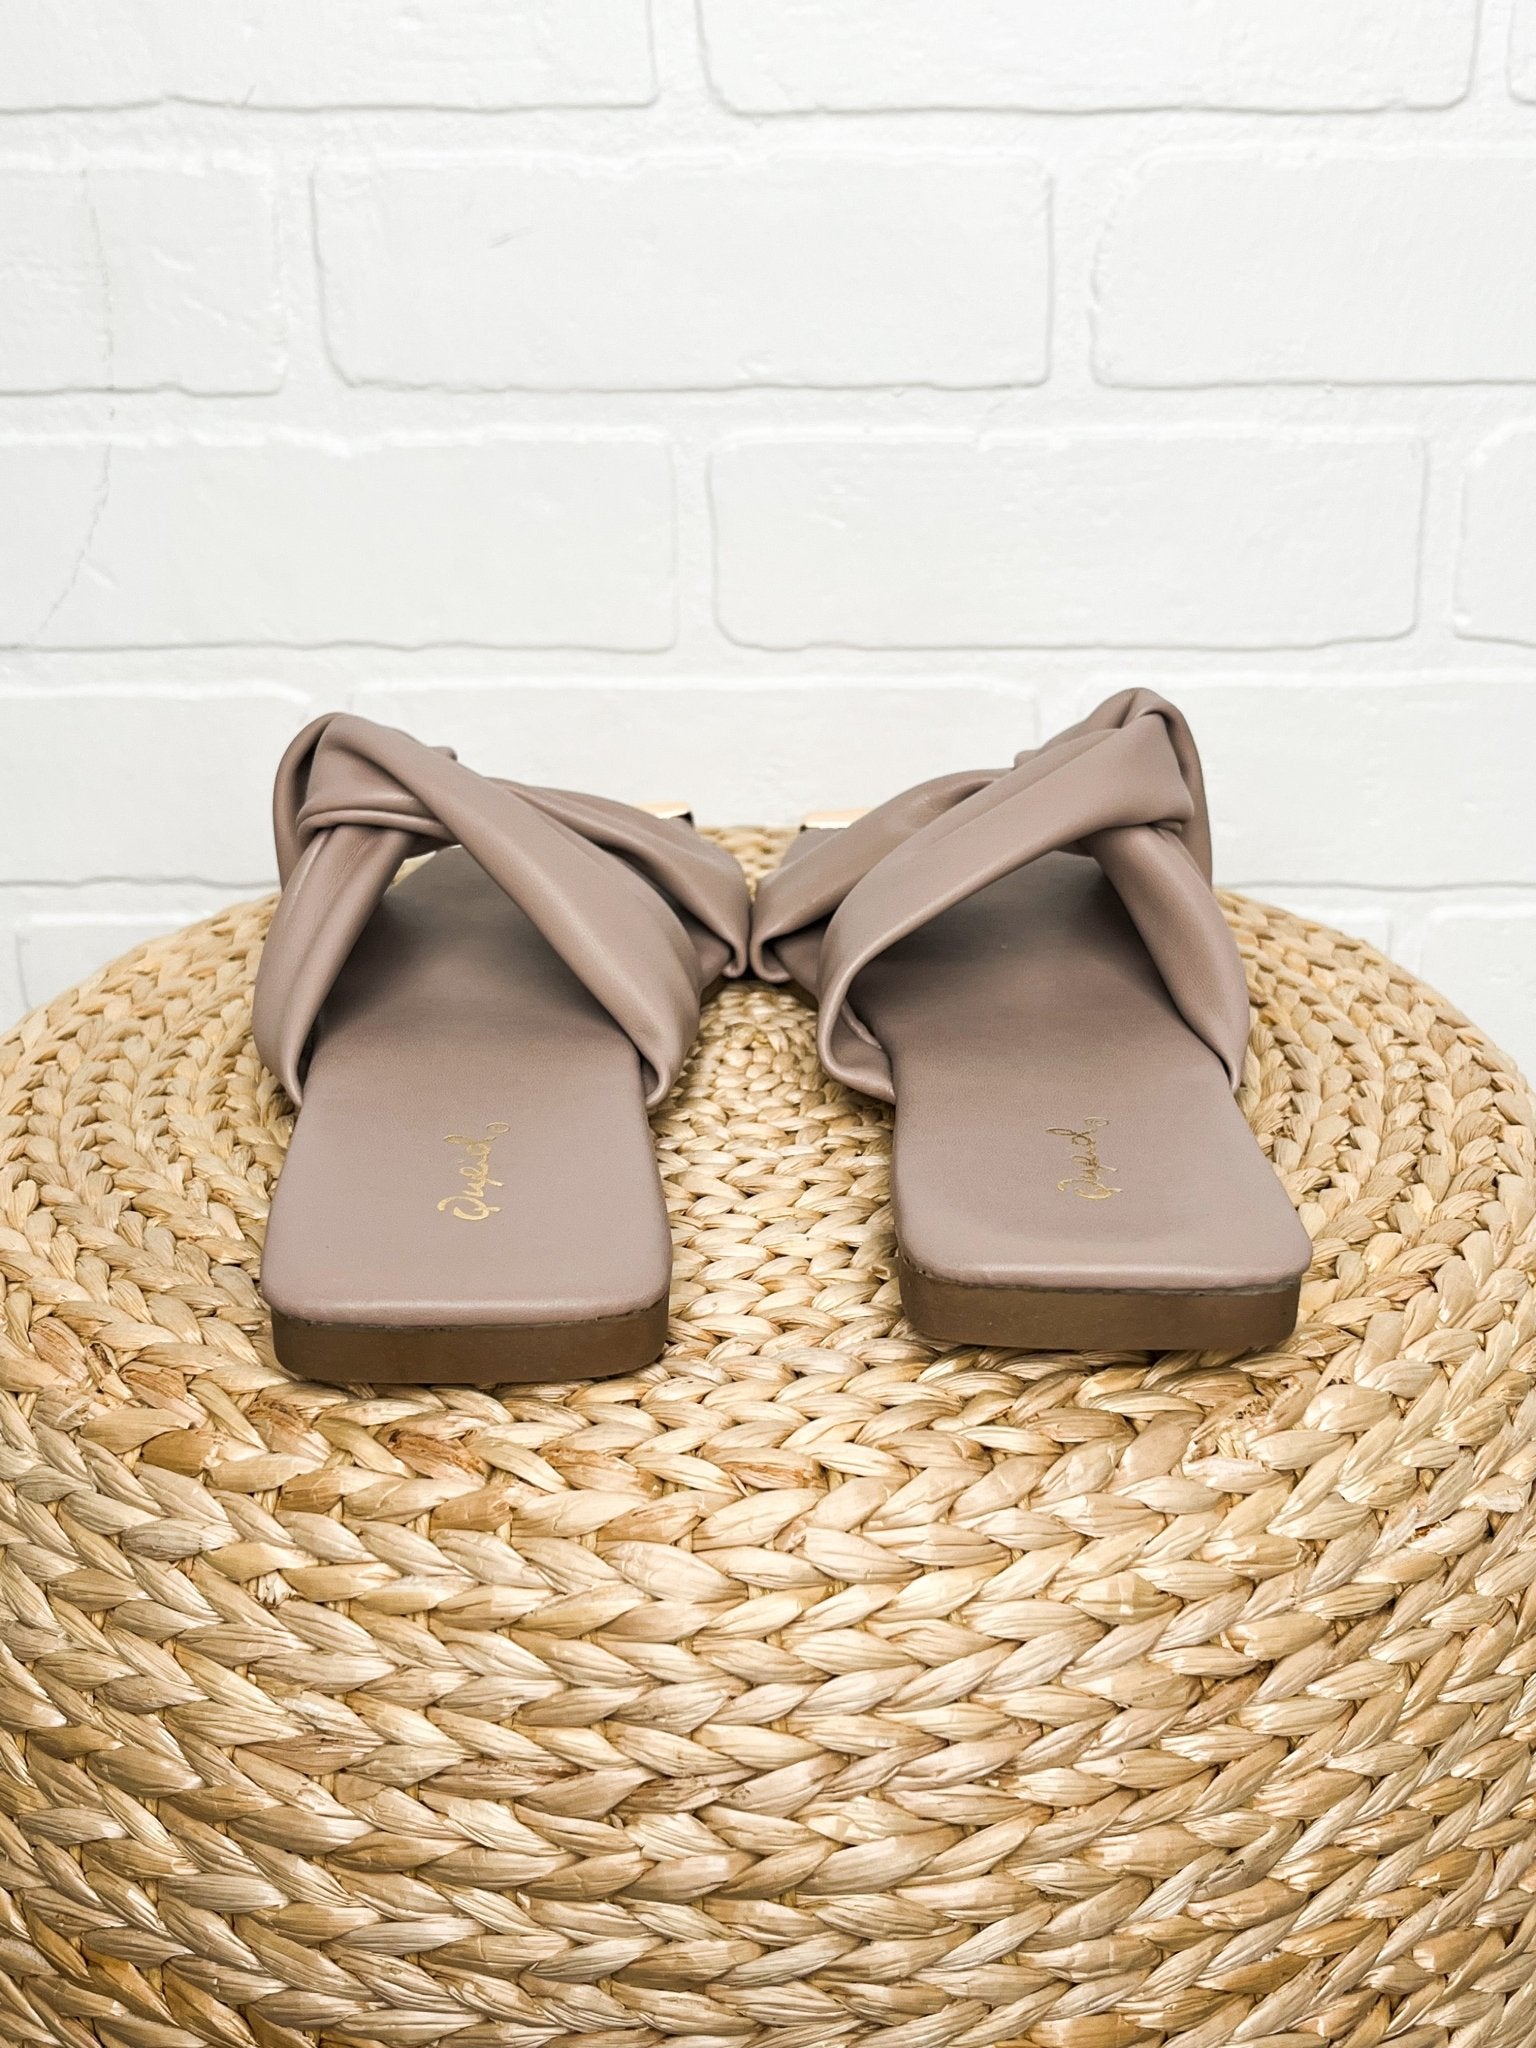 Aster ruched cross sandal birch Stylish shoes - Womens Fashion Shoes at Lush Fashion Lounge Boutique in Oklahoma City